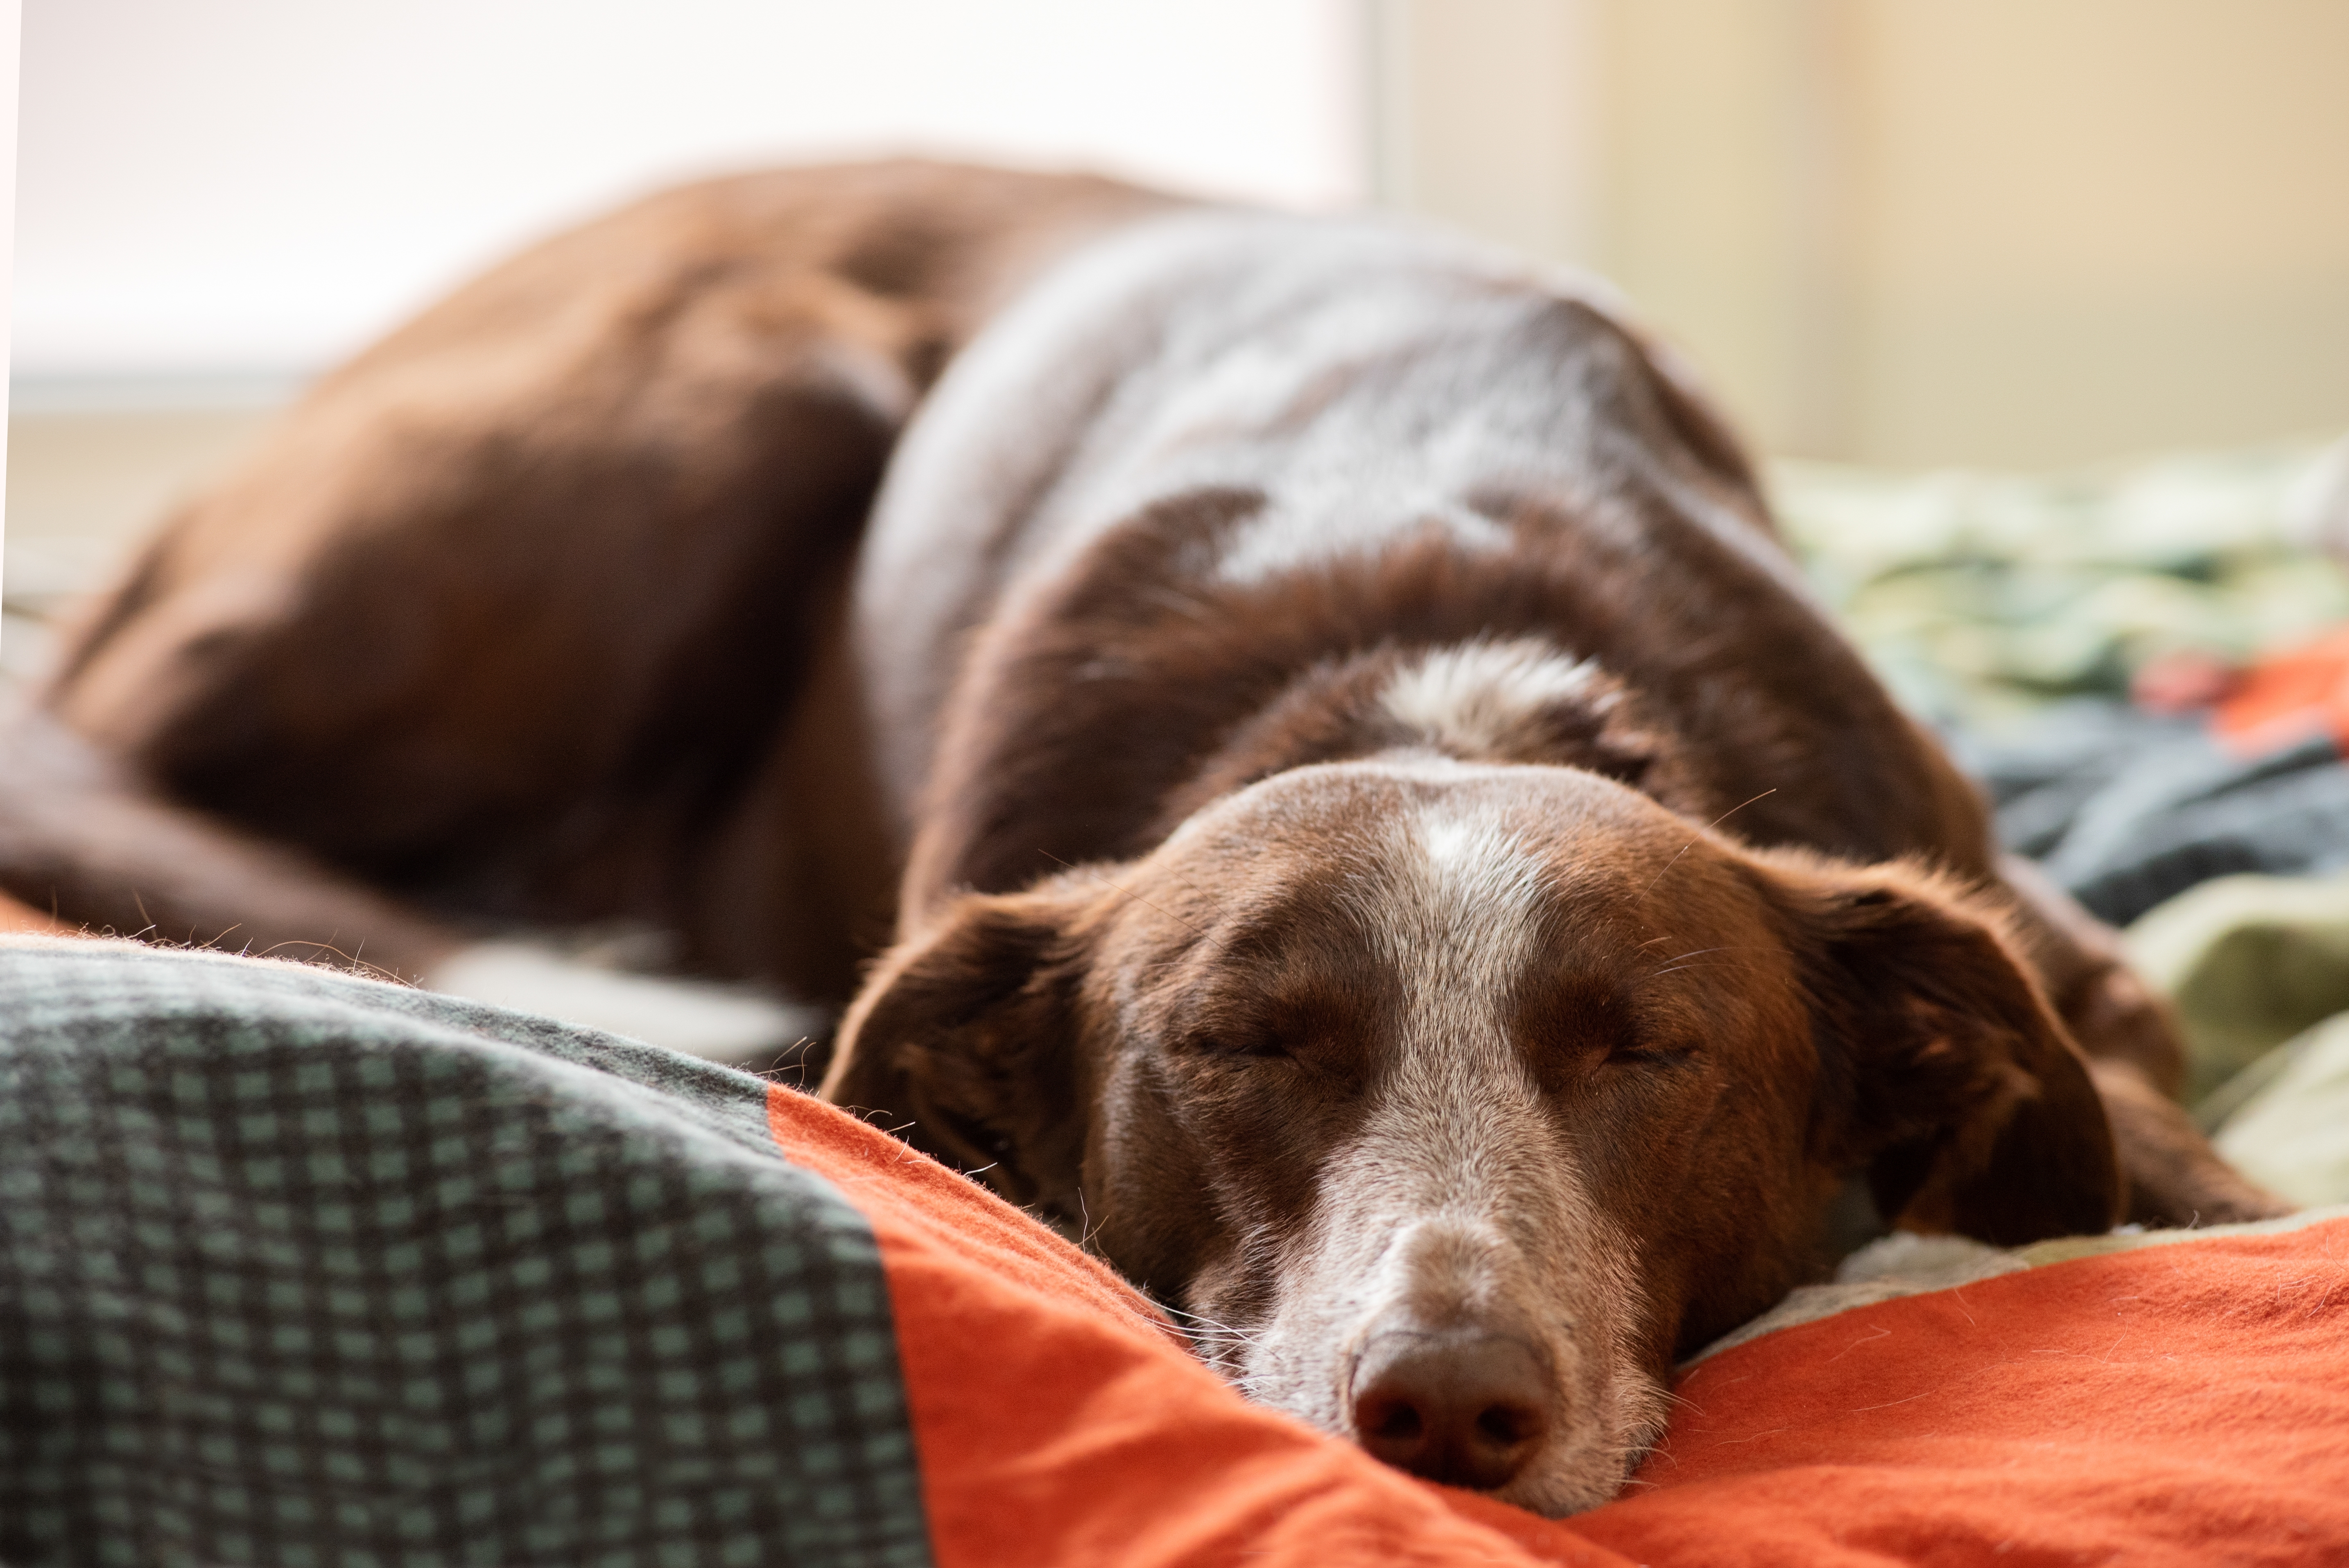 Dog lying in a bed | Source: Shutterstock